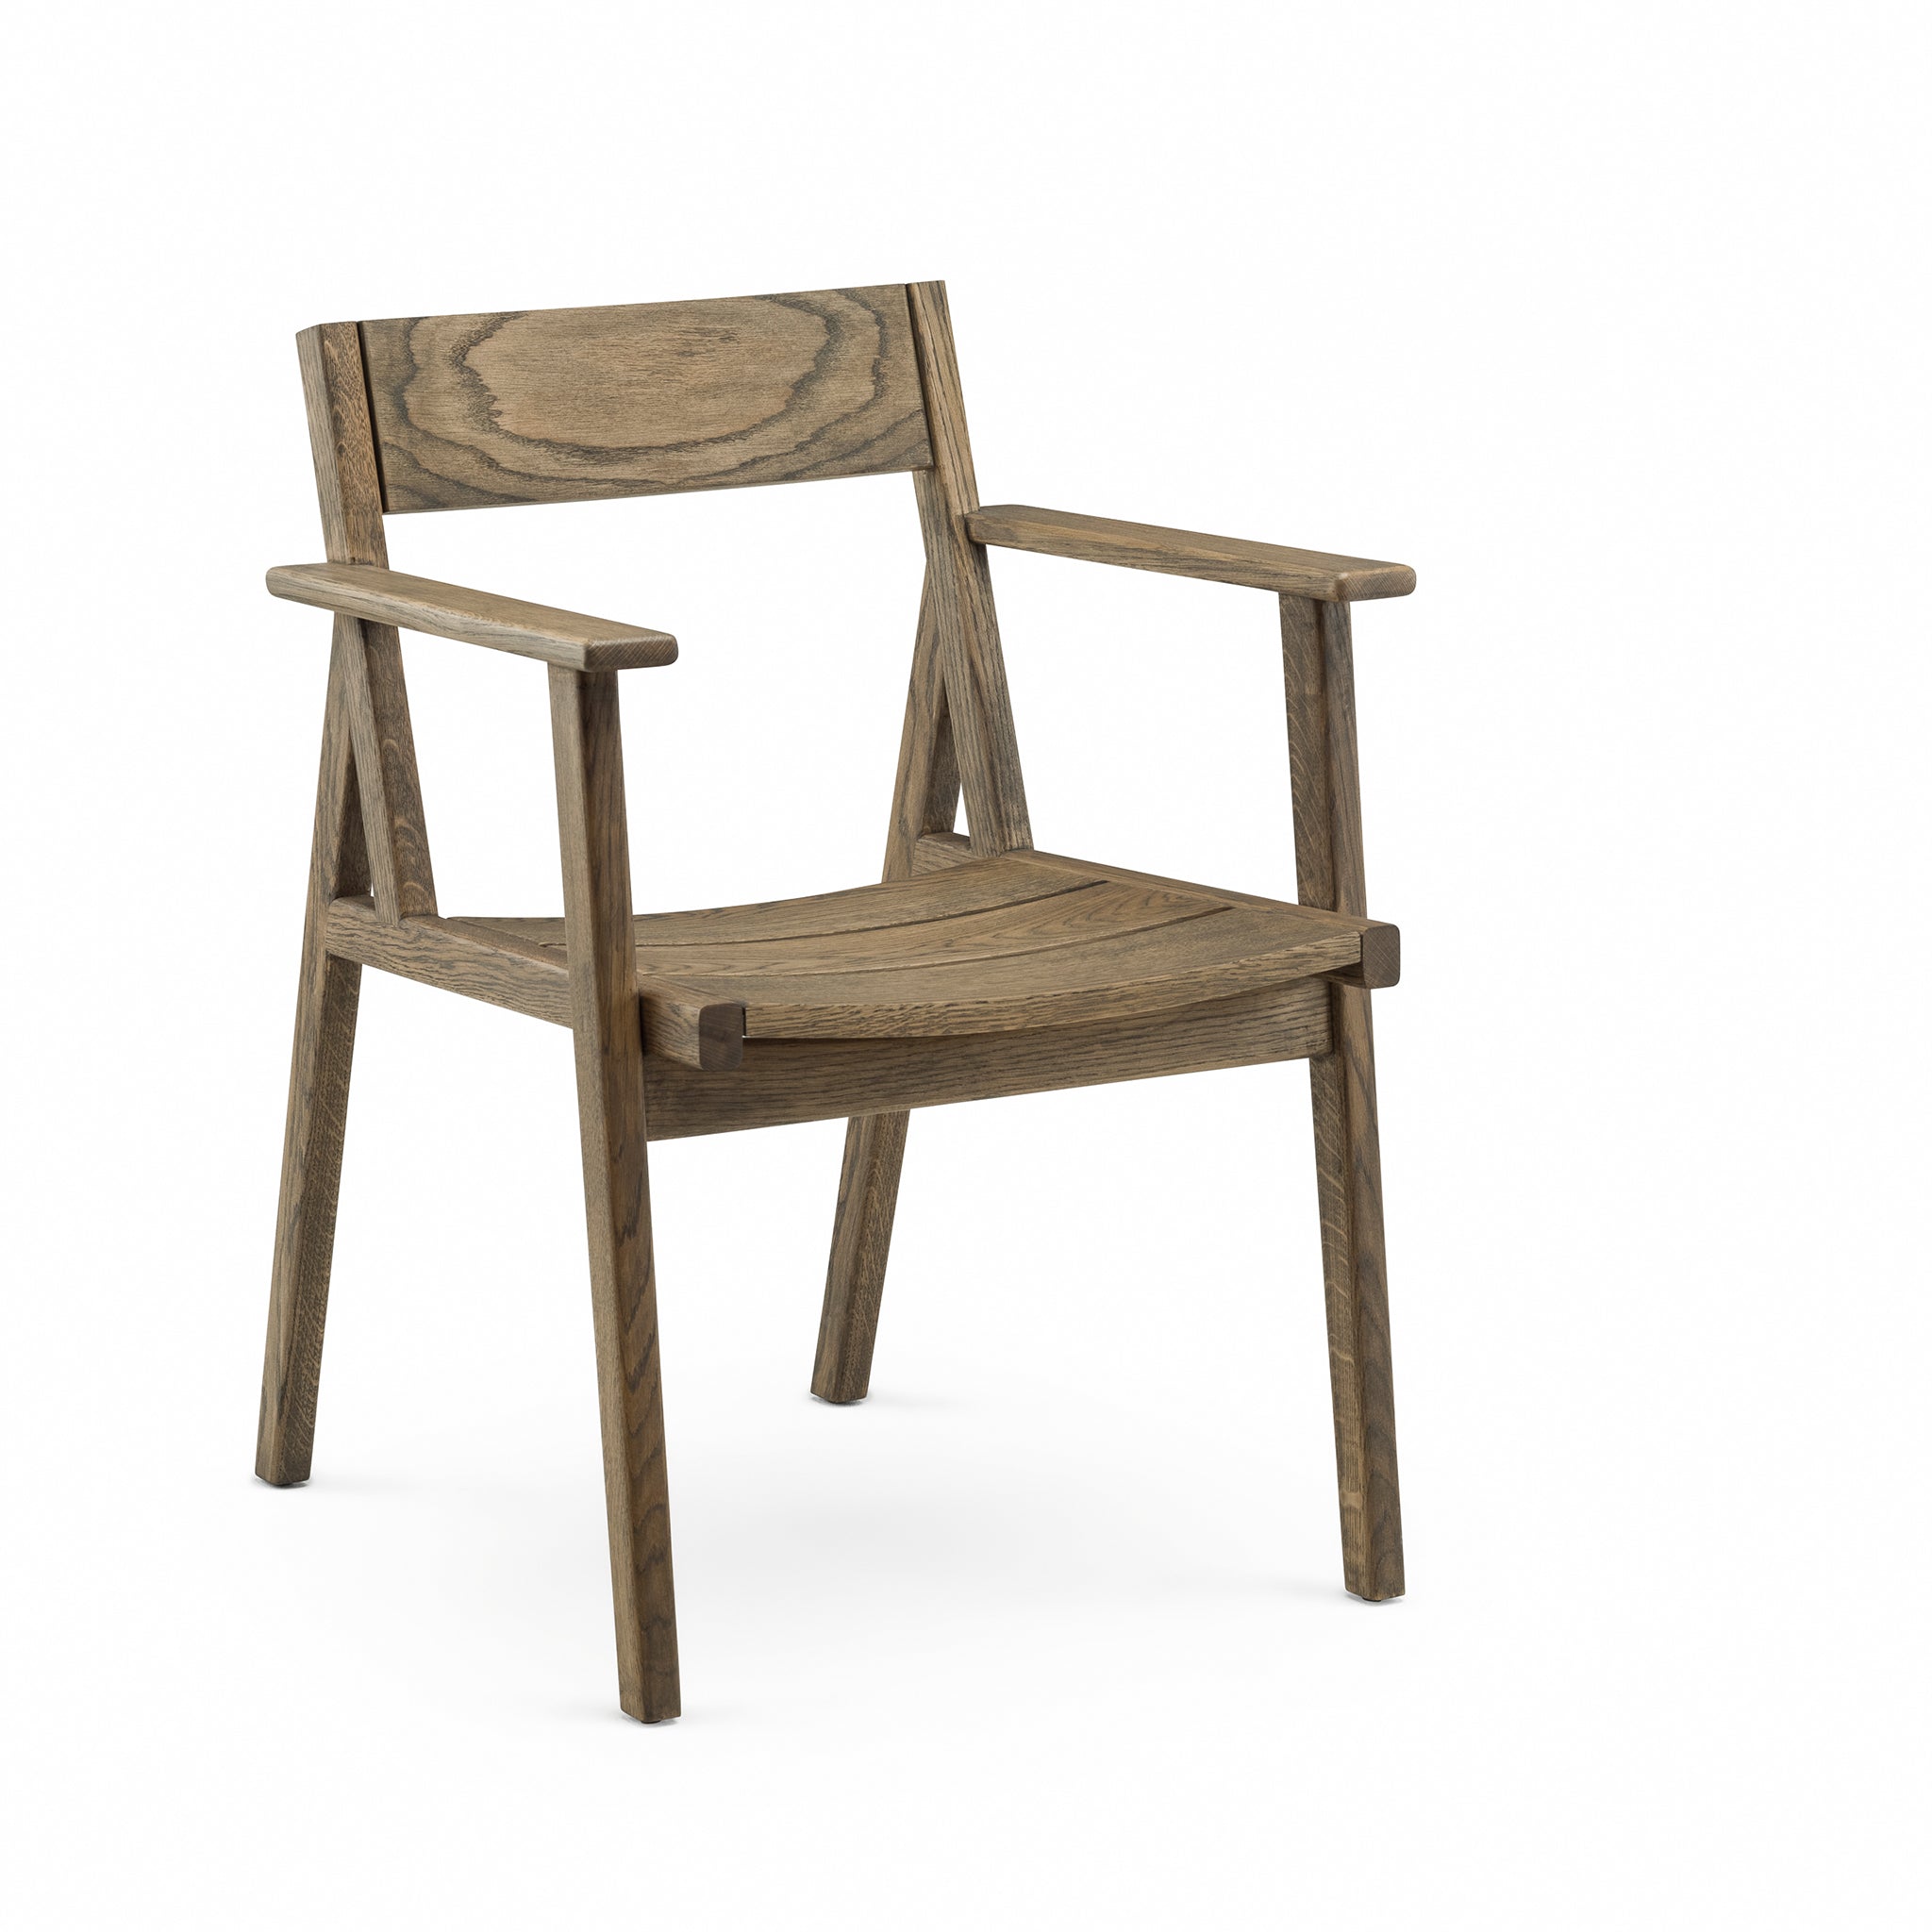 98.6°F Outdoor Dining Chair by Lyndon Neri and Rossana Hu